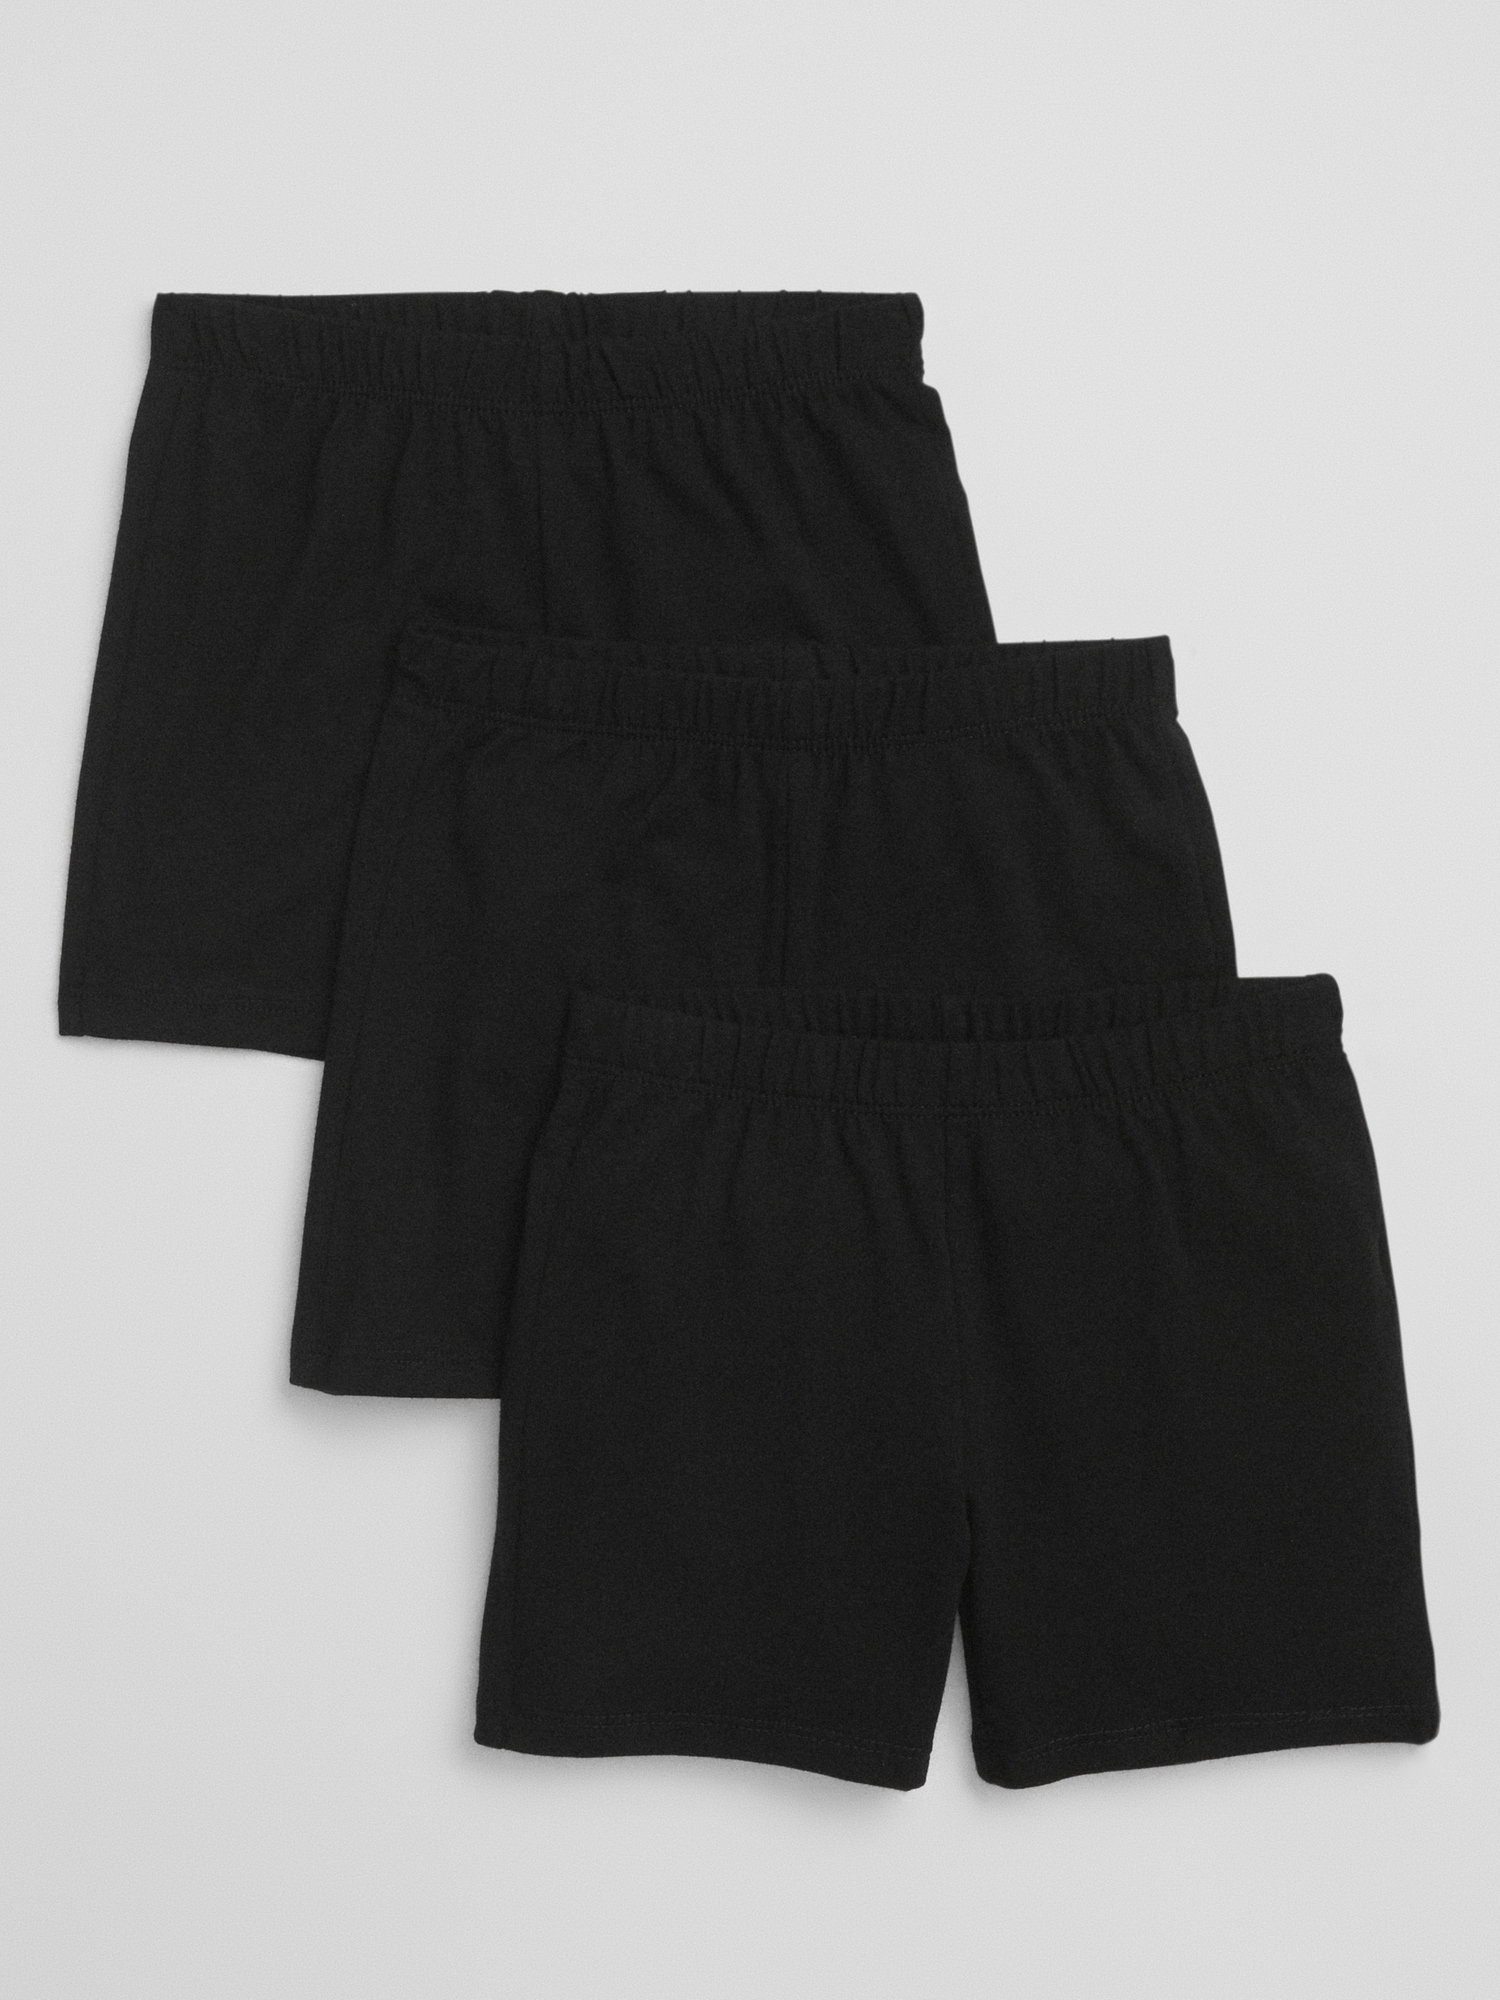 Under Dress Shorts for Cartwheels and Playground Modesty